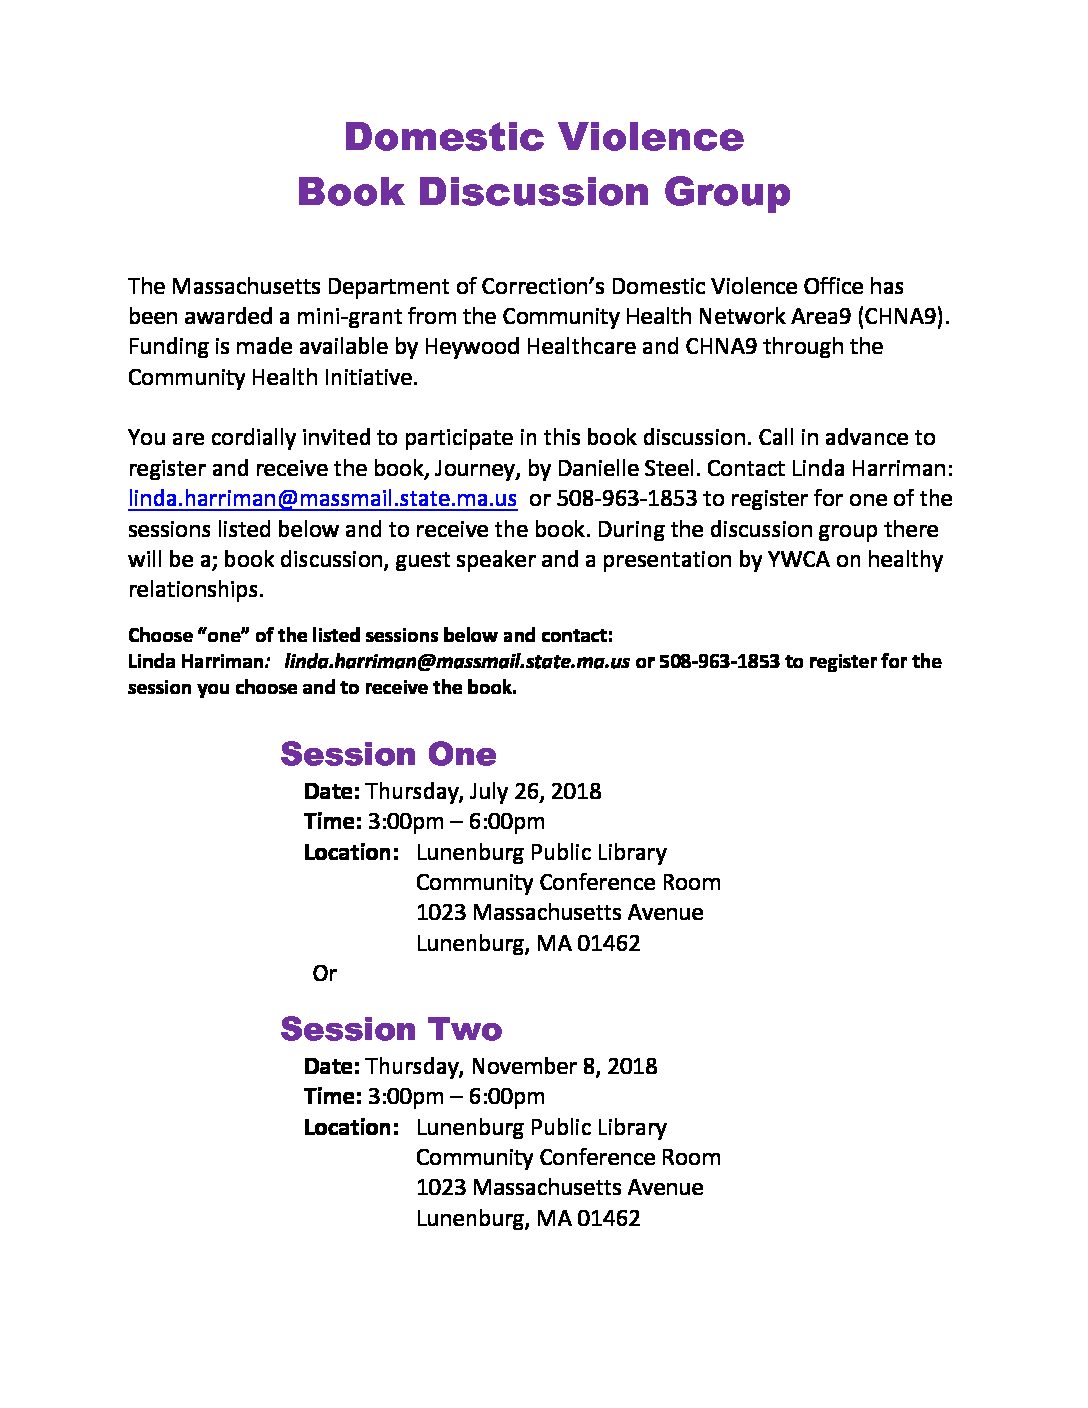 Domestic Violence Book Discussion Group Session Two